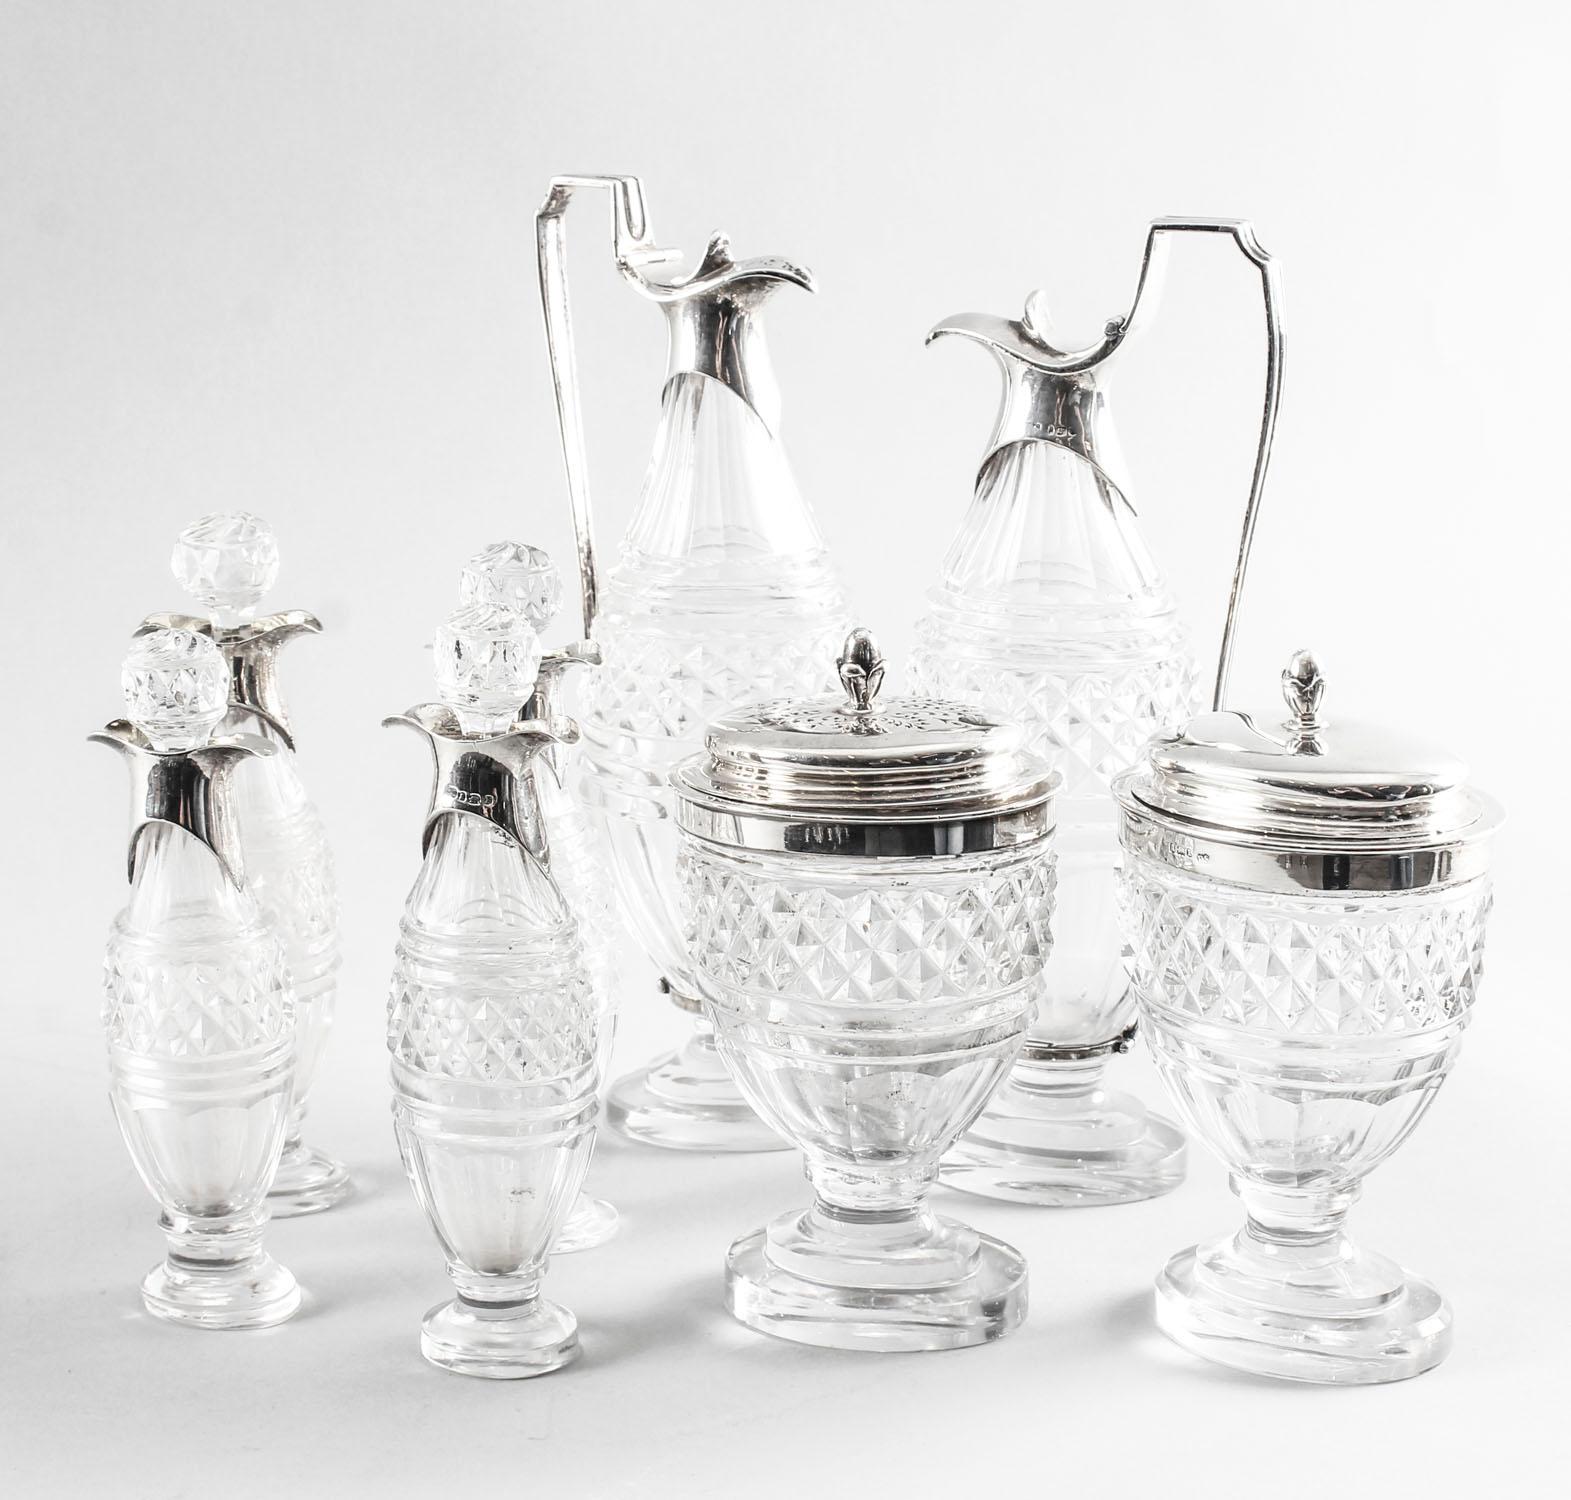 This is an exquisite antique large English George III sterling silver condiment cruet set with hallmarks for London 1800 and the makers mark of the renowned silversmith Paul Storr.

This rare complete set is in superb condition and features eight